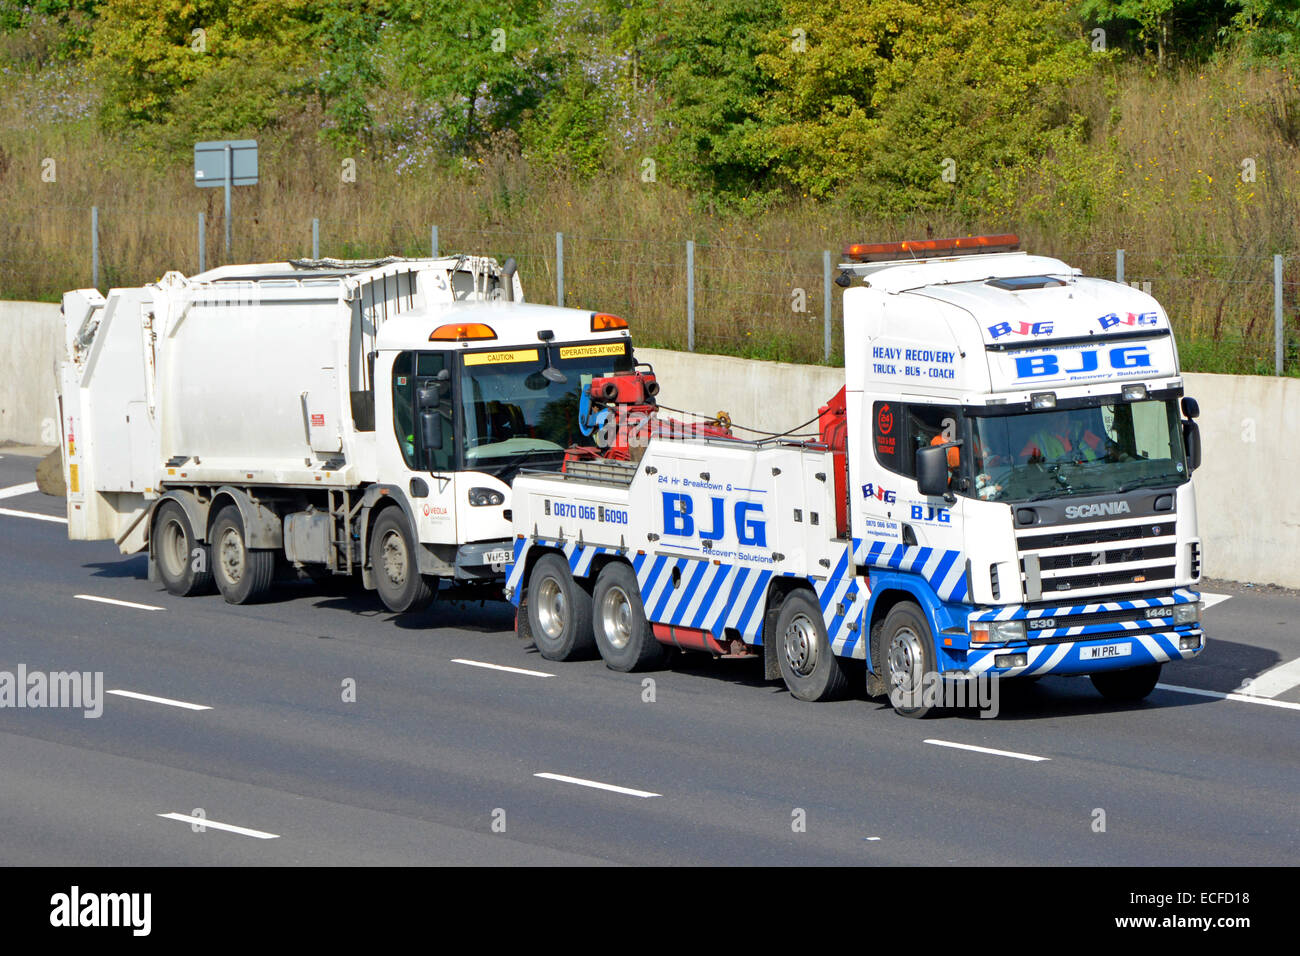 Heavy hgv Scania breakdown rescue tow truck moving a white Veolia garbage rubbish refuse dustcart bin lorry truck off of m25 motorway road England UK Stock Photo